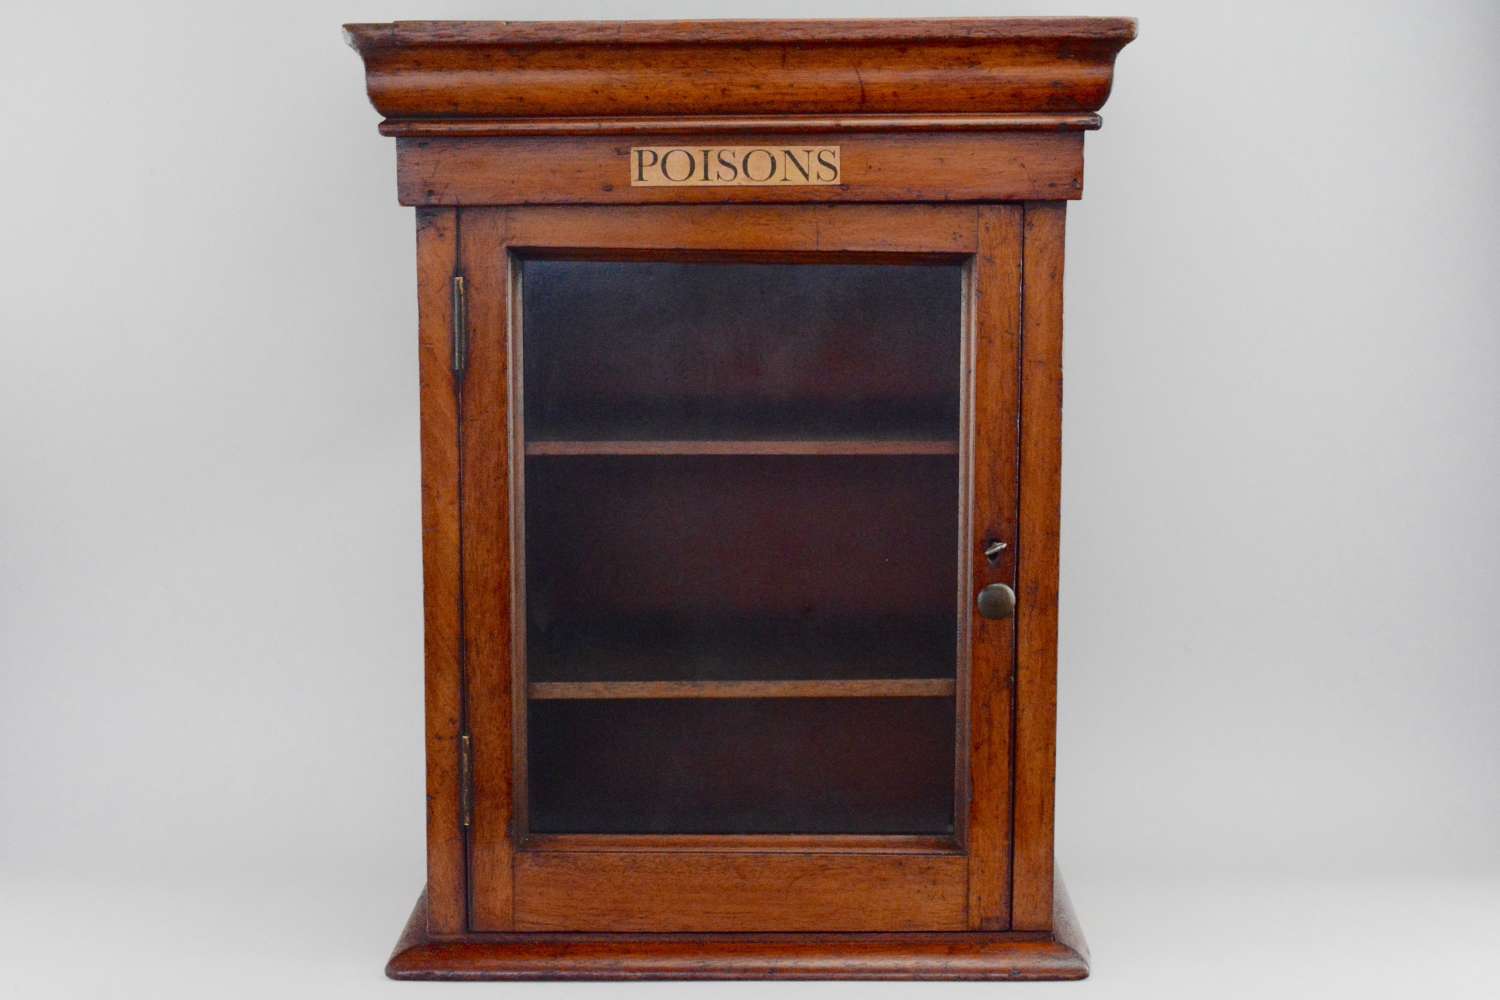 A Victorian apothecary poisons wall cabinet.